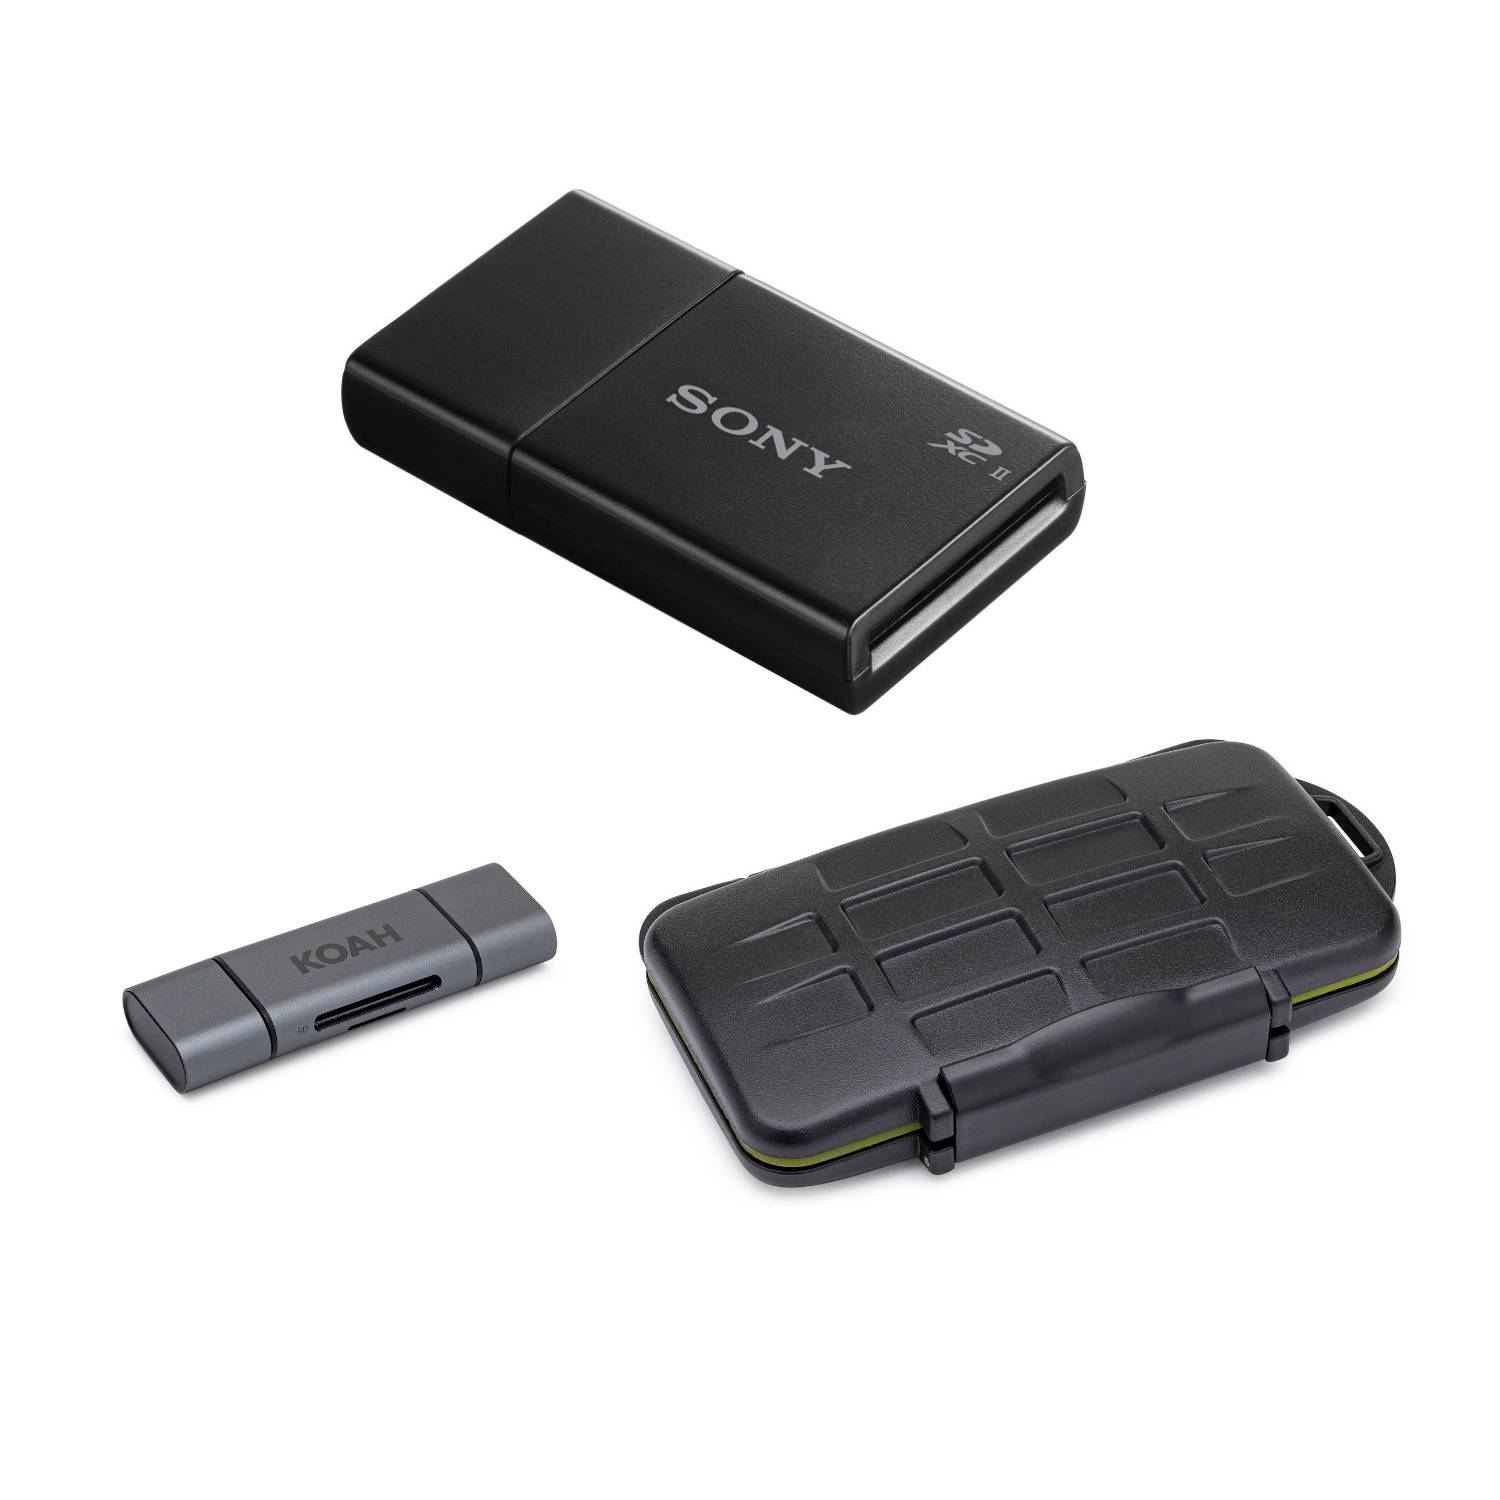 Sony UHS-II USB 3.1 SD Card Reader with Carrying Case and Card Reader Bundle